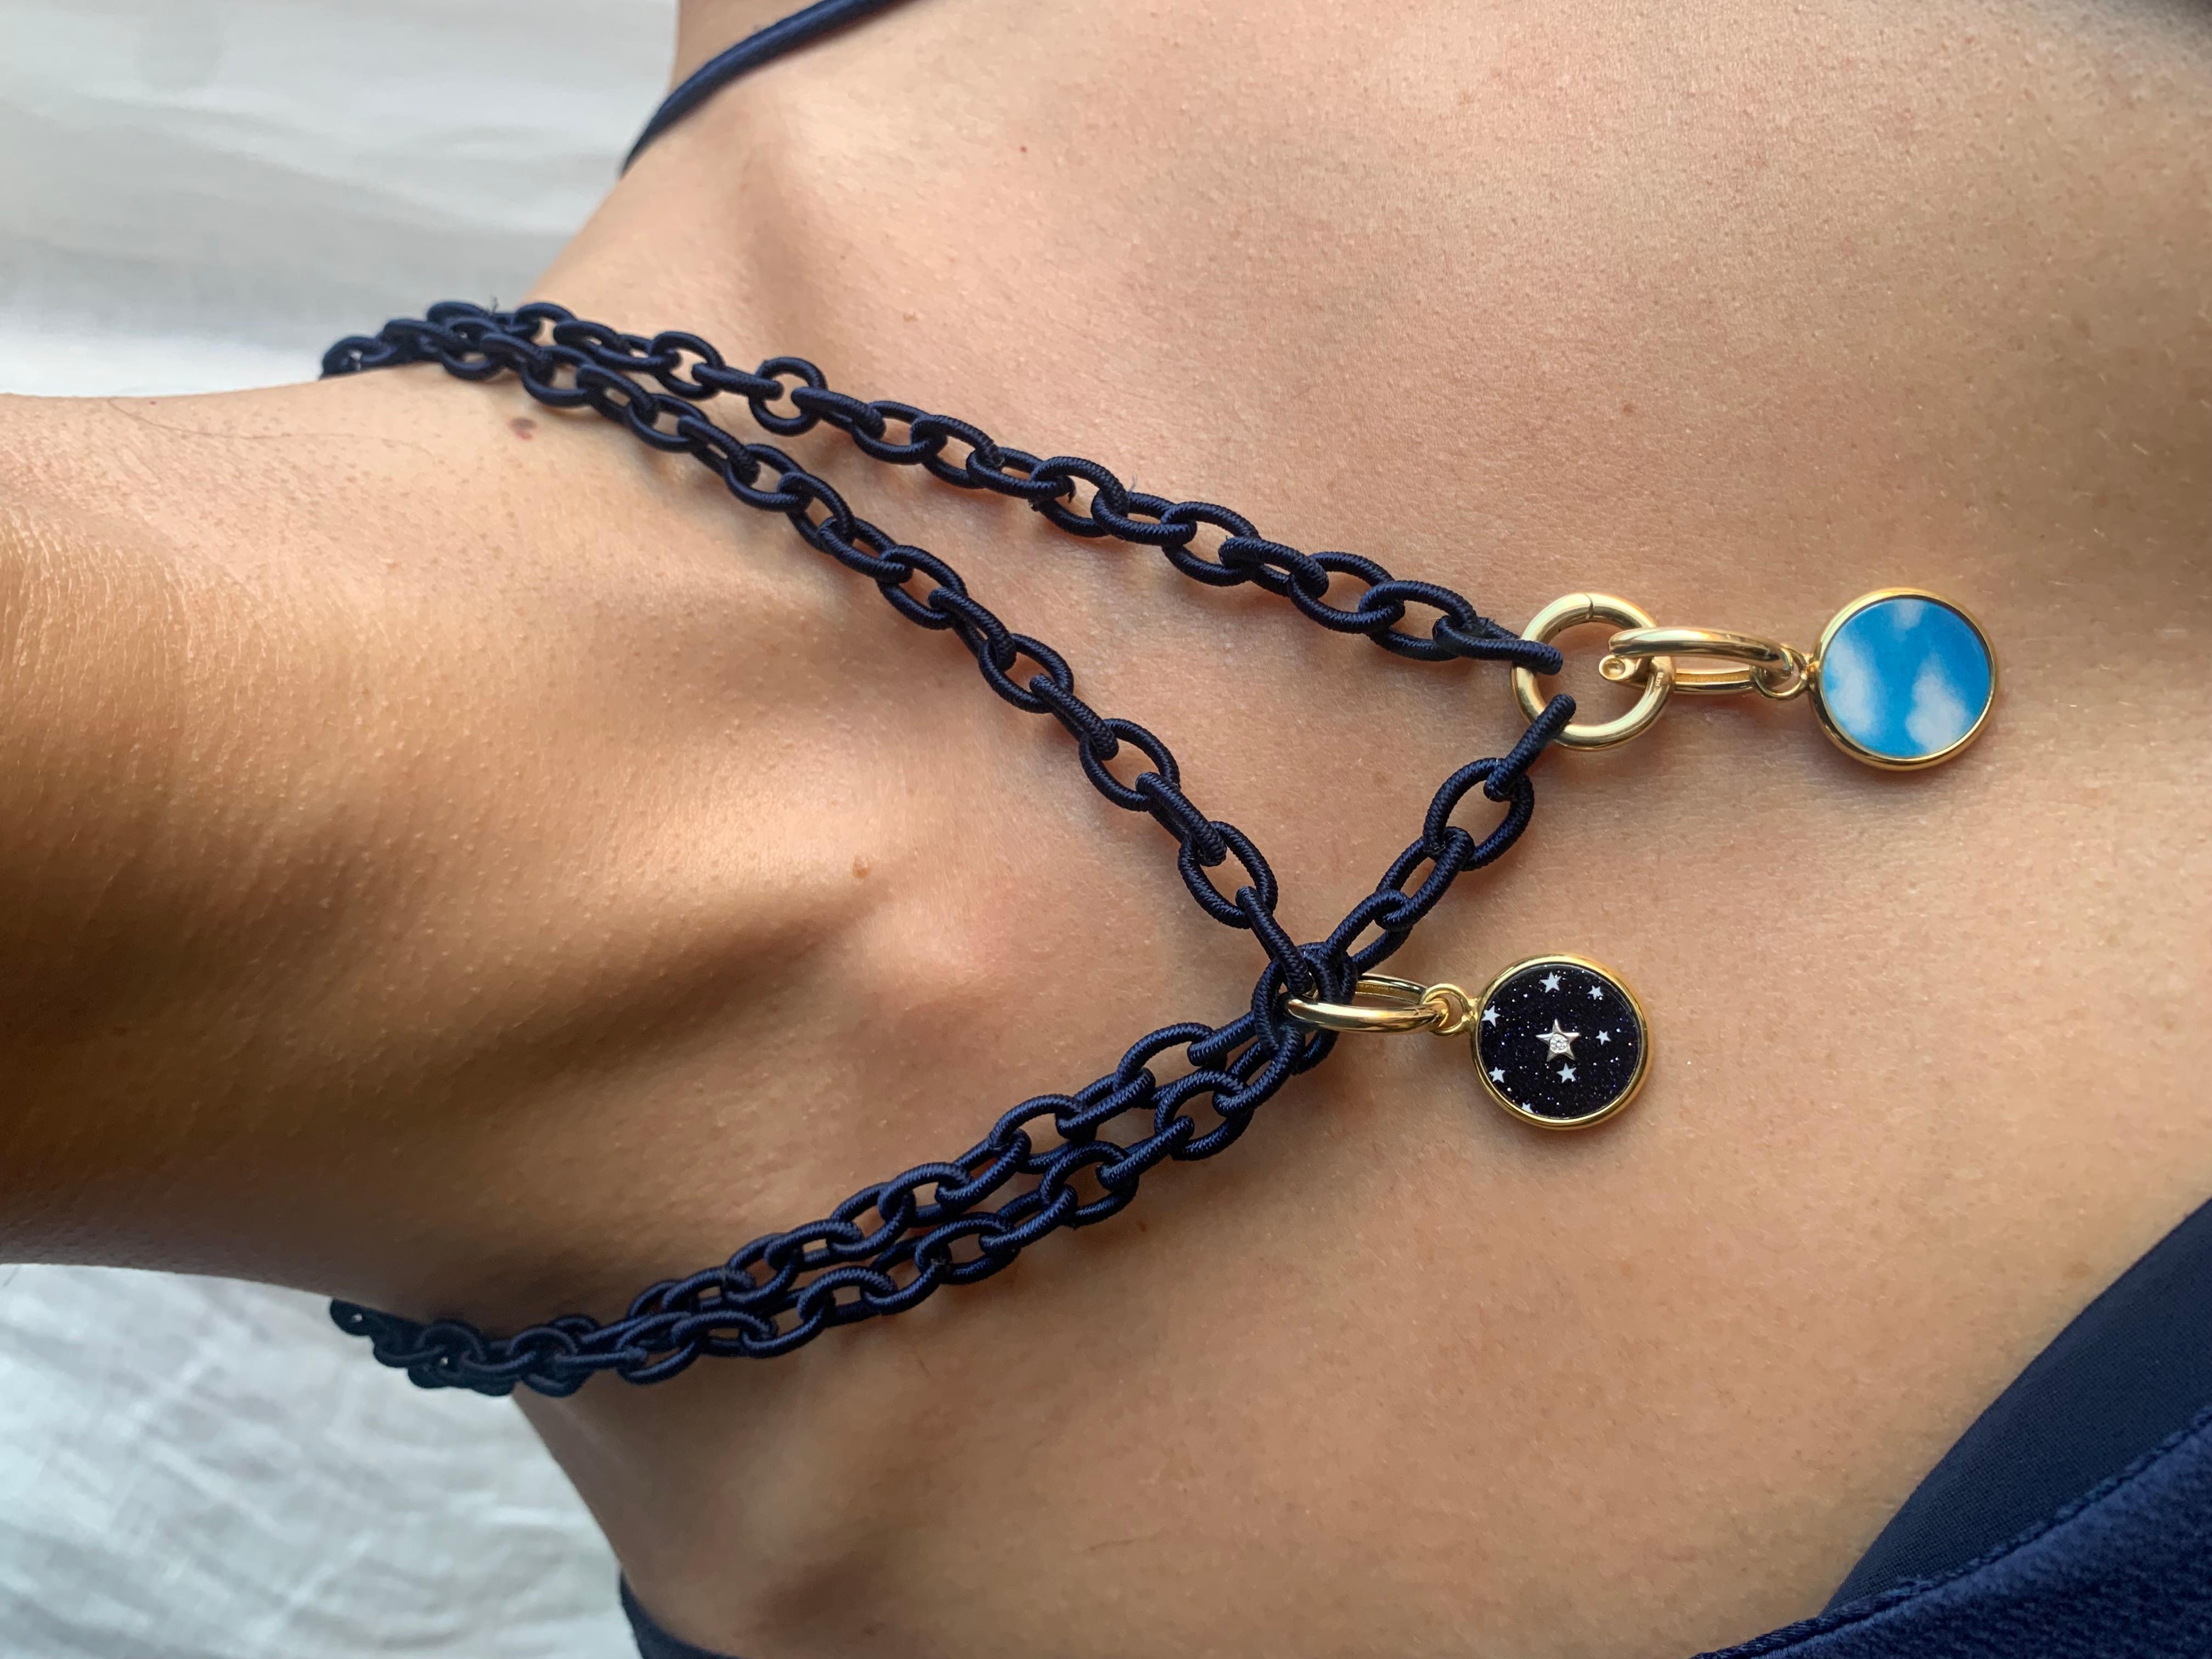 Silk Link Necklace in Navy Blue color
Chain links are wrapped in silk cord 
18k gold center ring opens to hold charms and functions as a clasp to adjust length 
35